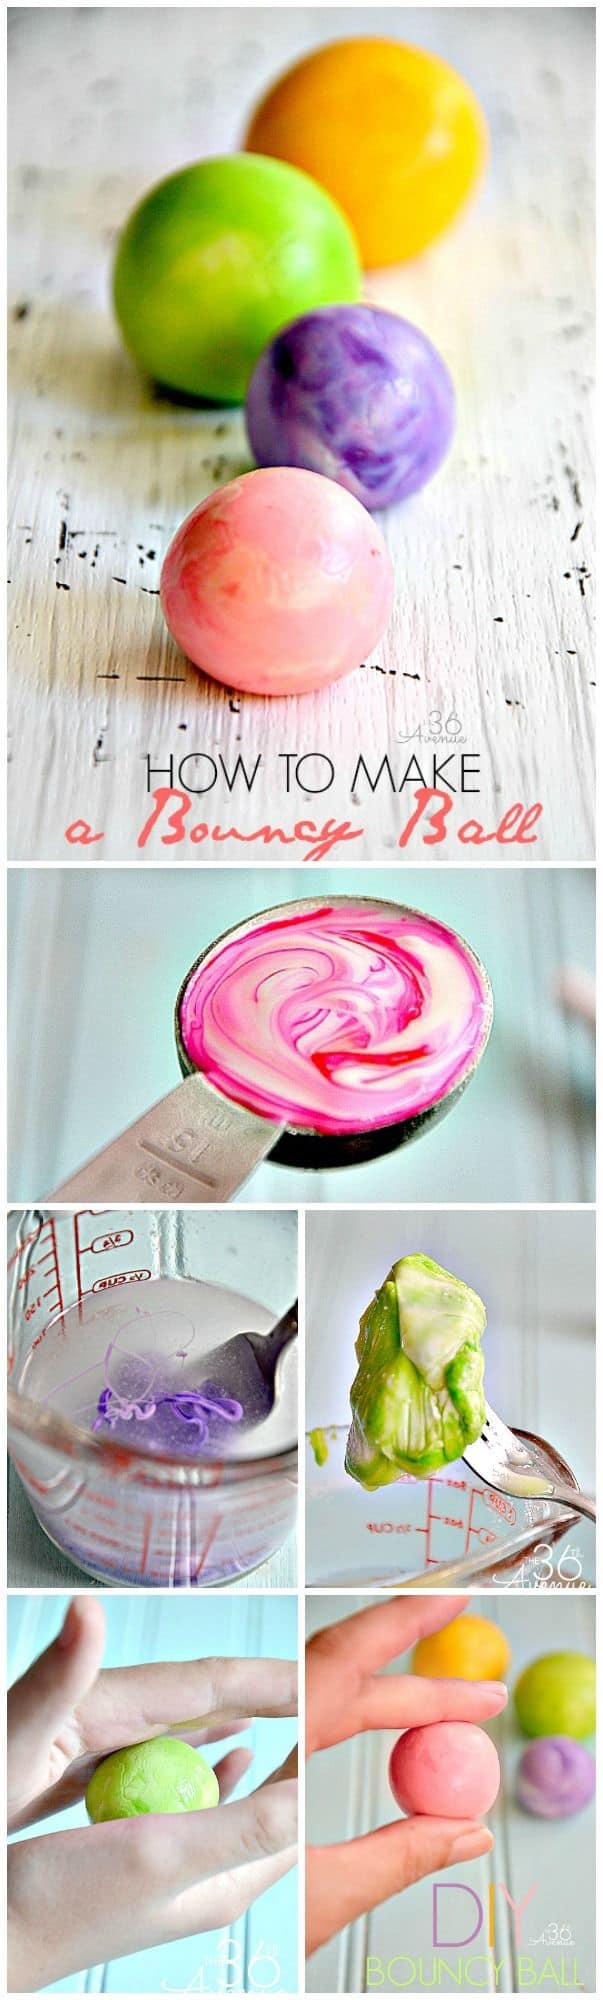 How to make a bouncy ball